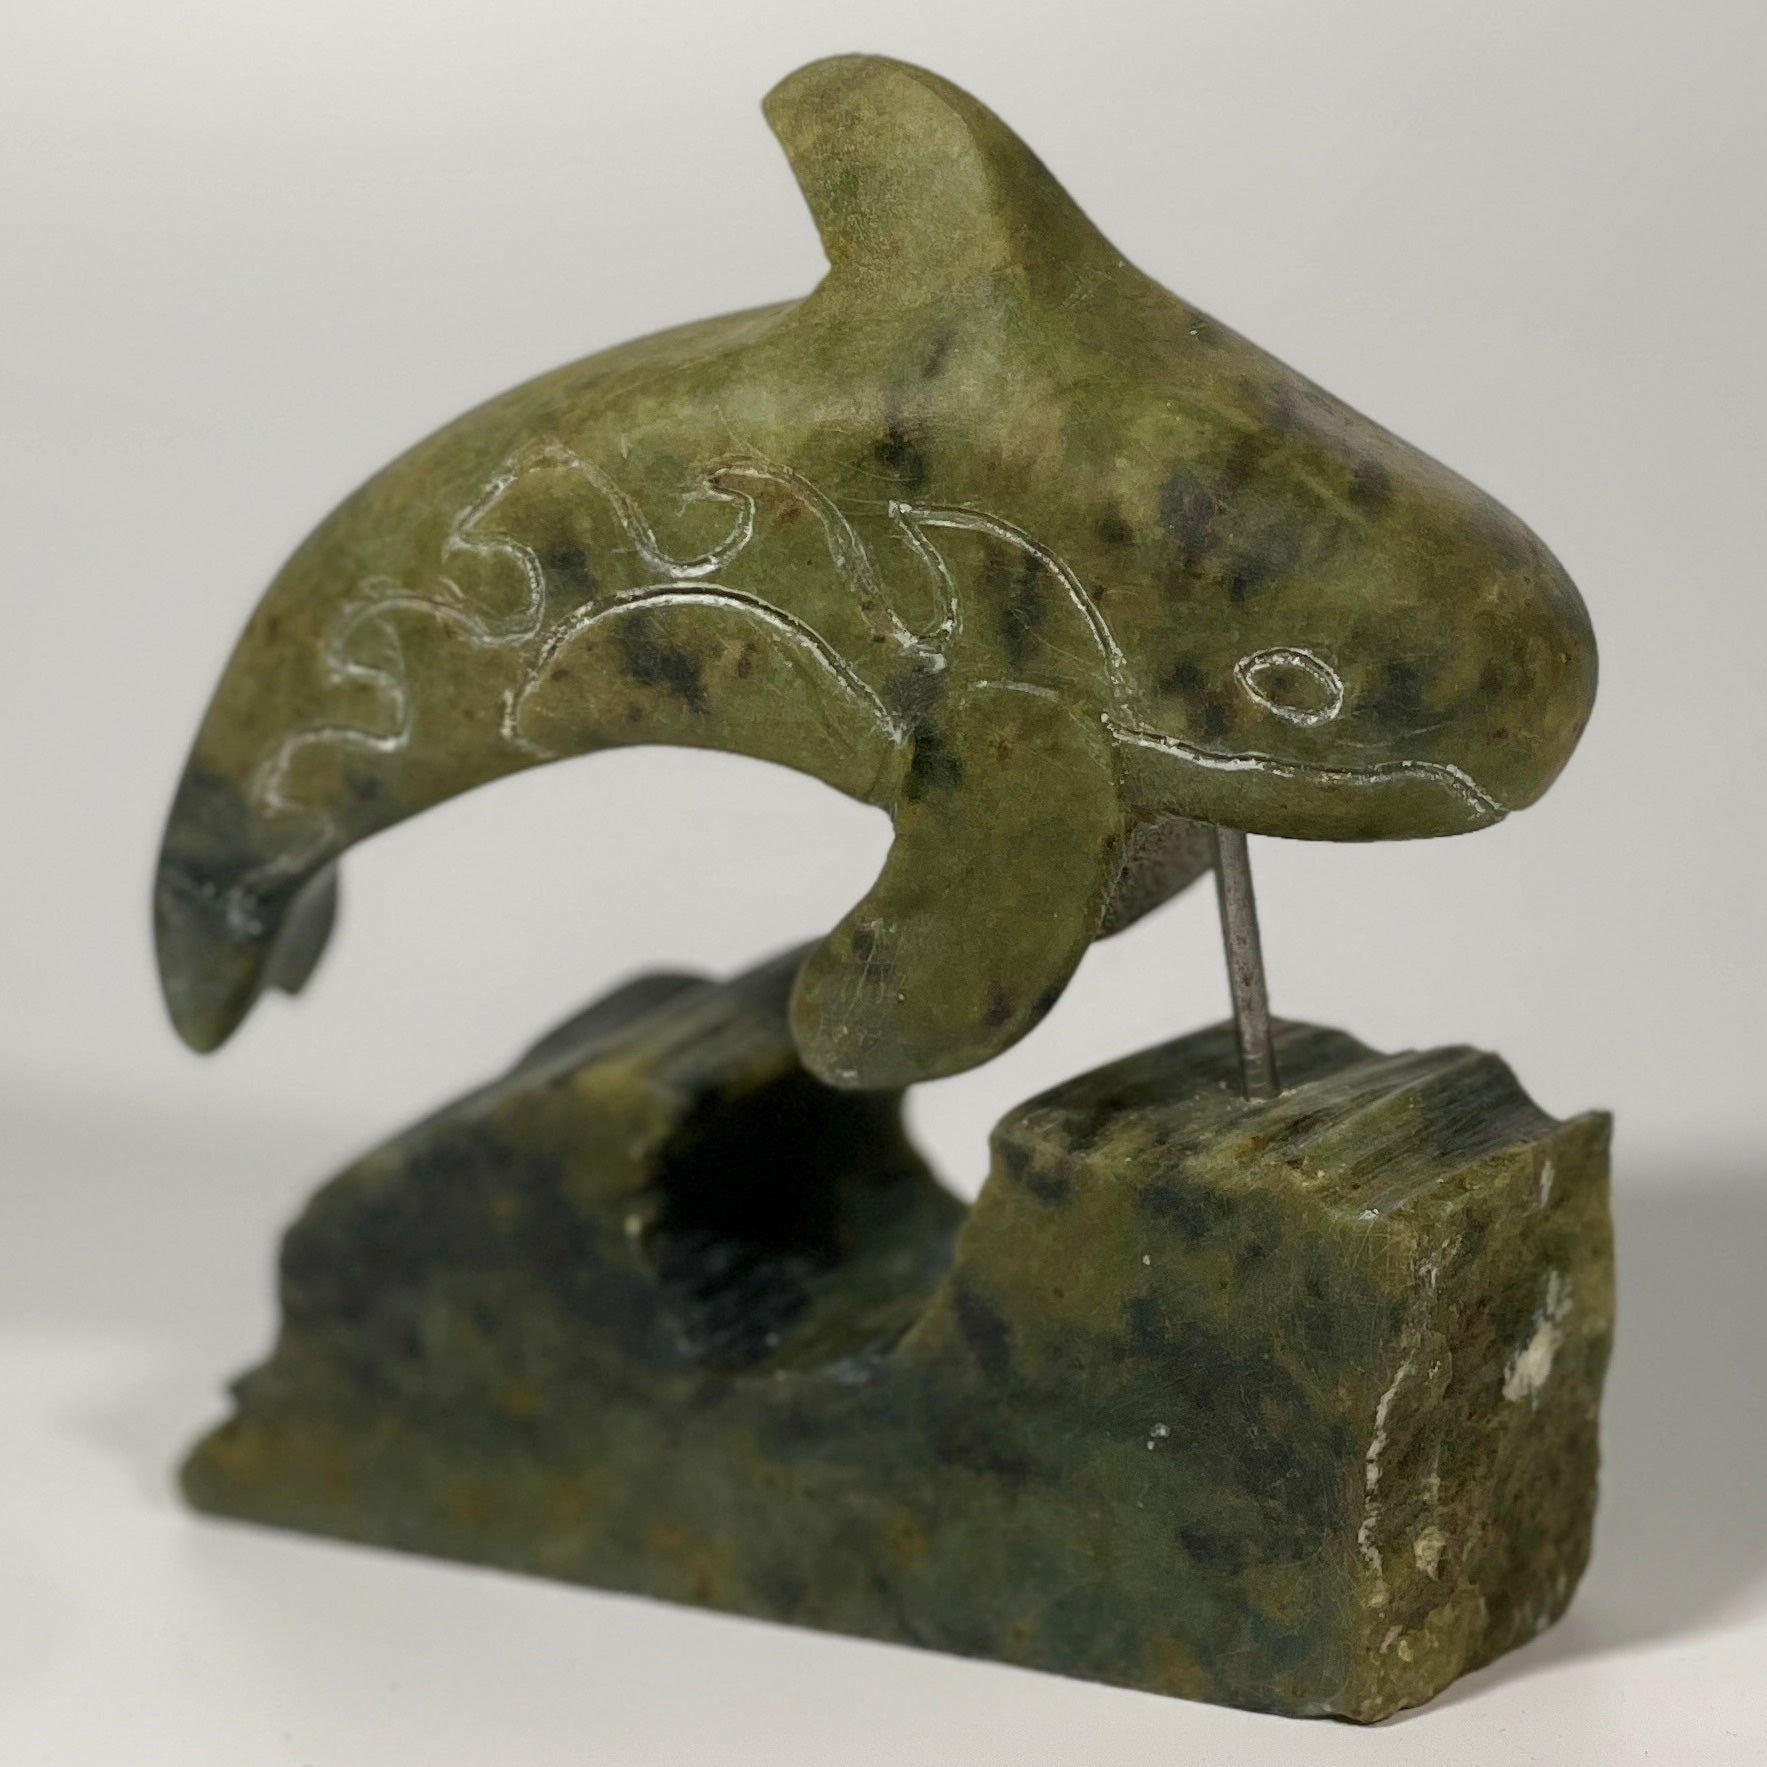 A Art Class Small Sculpture ~ 3+ Hours of a dolphin on top of a rock by FathomStoneArt.